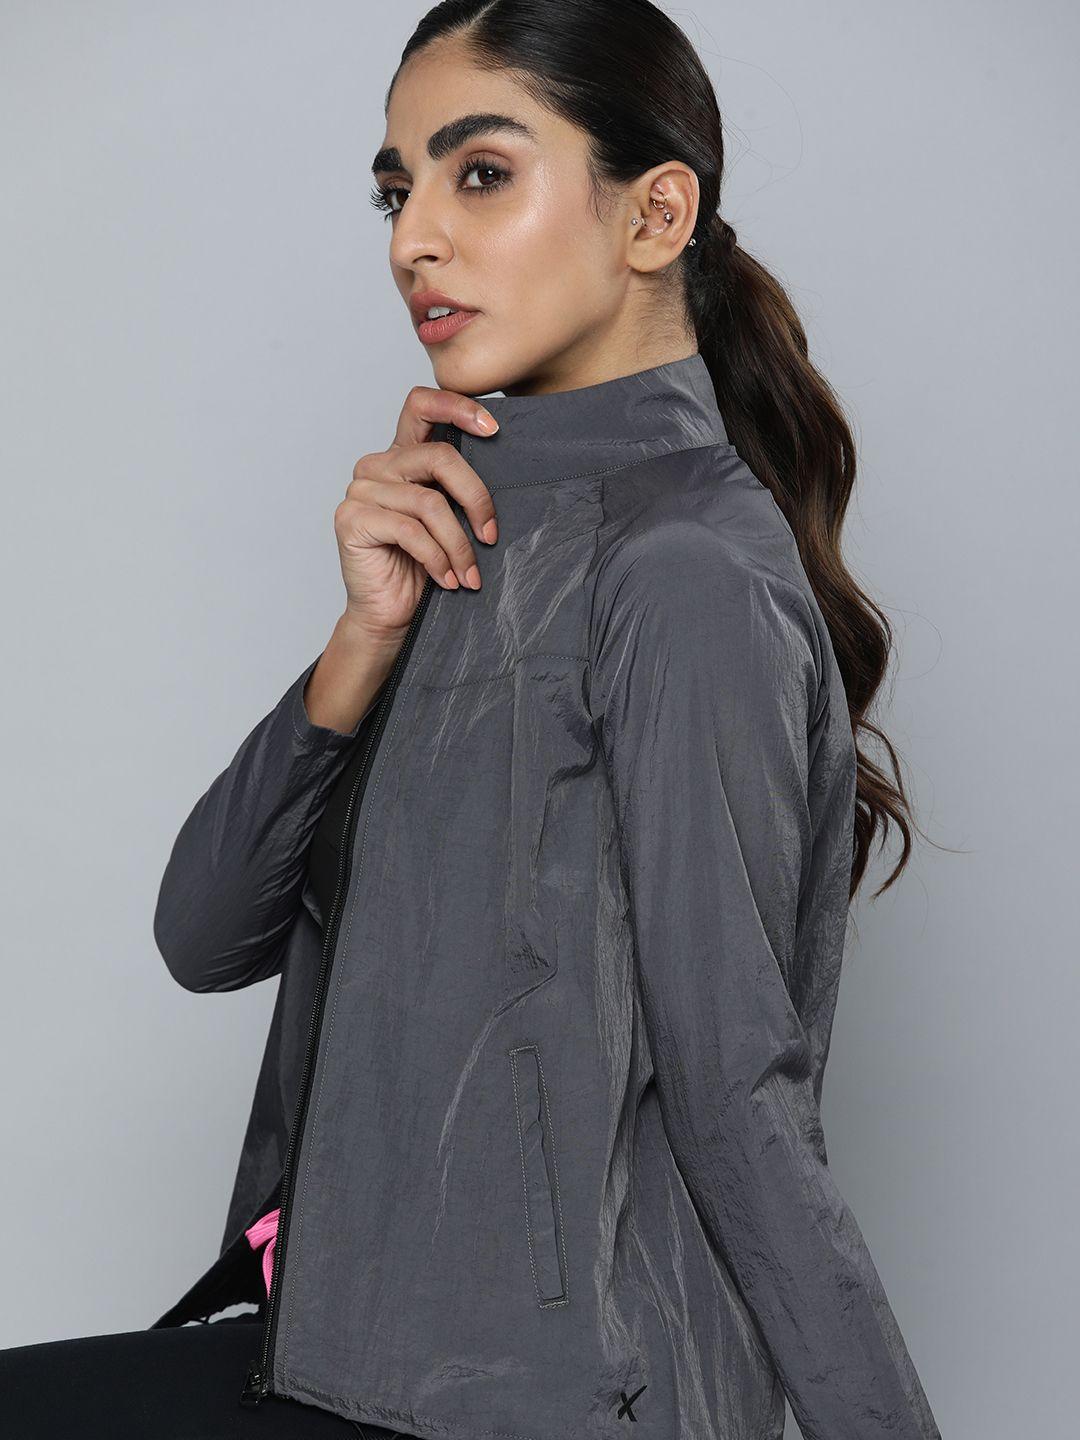 hrx by hrithik roshan women charcoal grey solid running sporty jacket